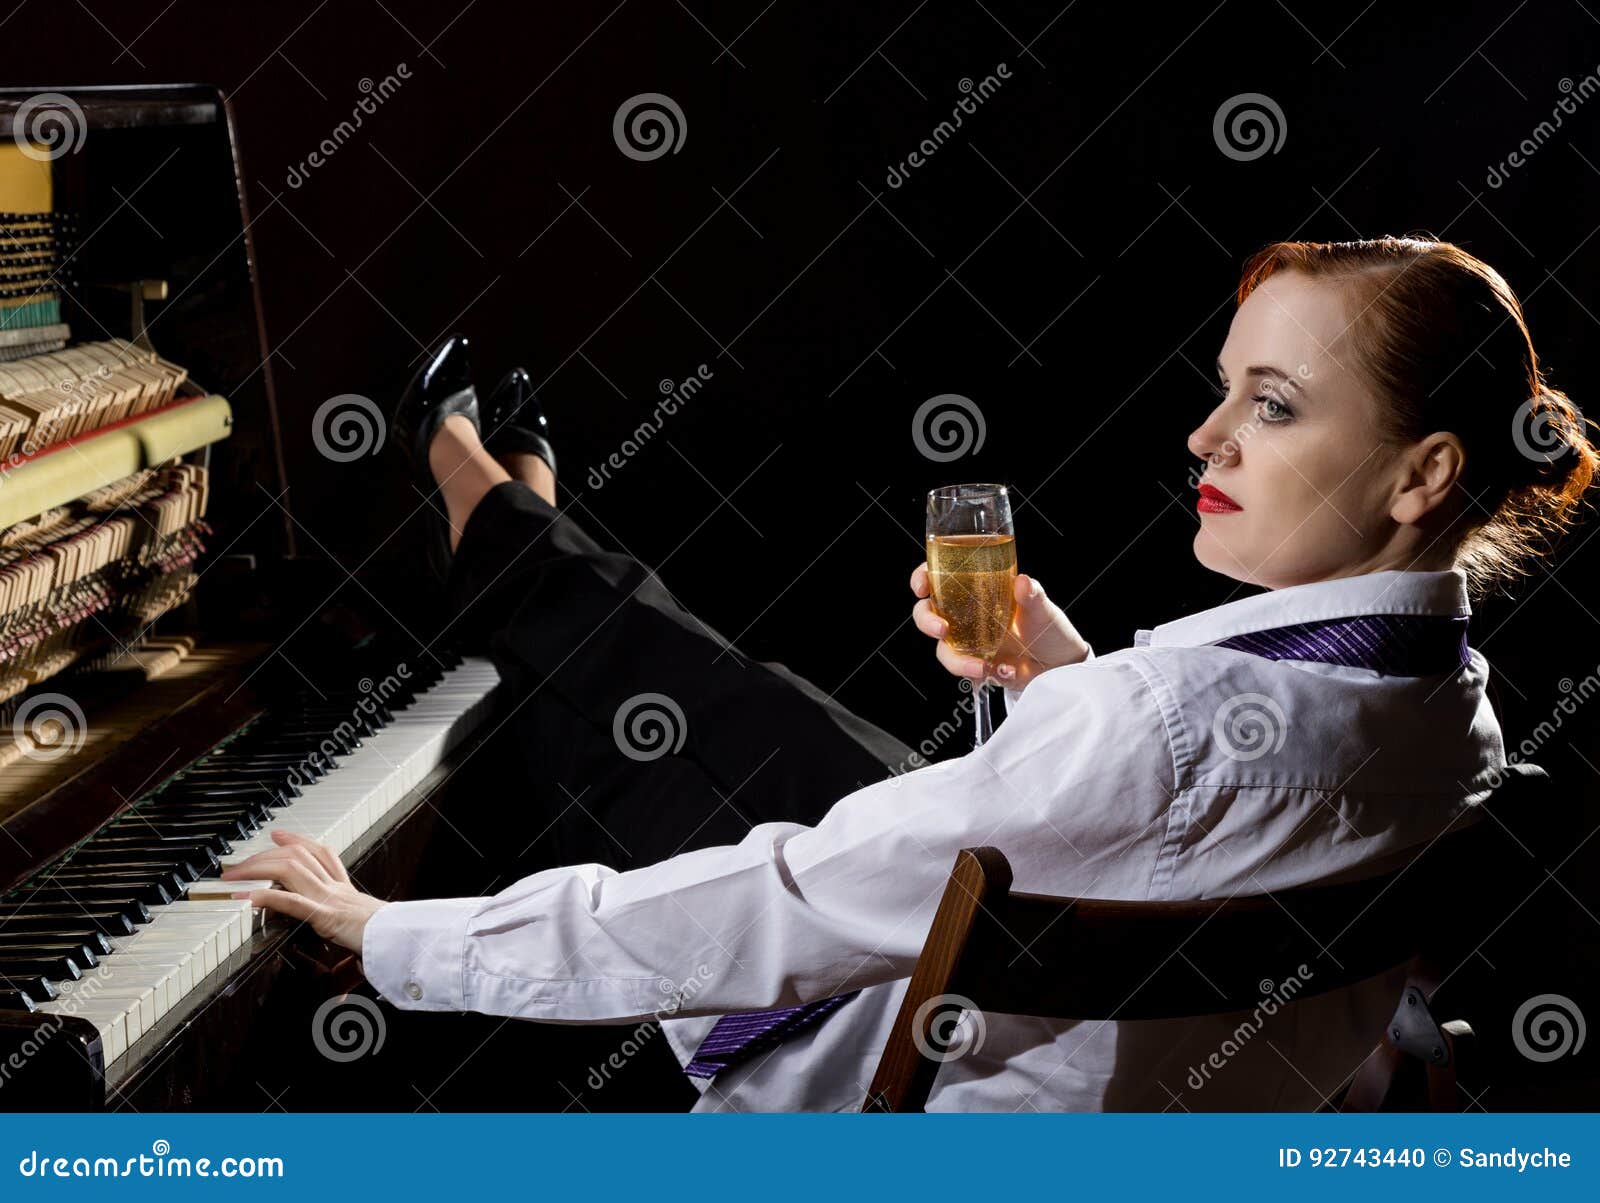 elegant woman in a white shirt and tie sitting next to the piano and drinks champagne